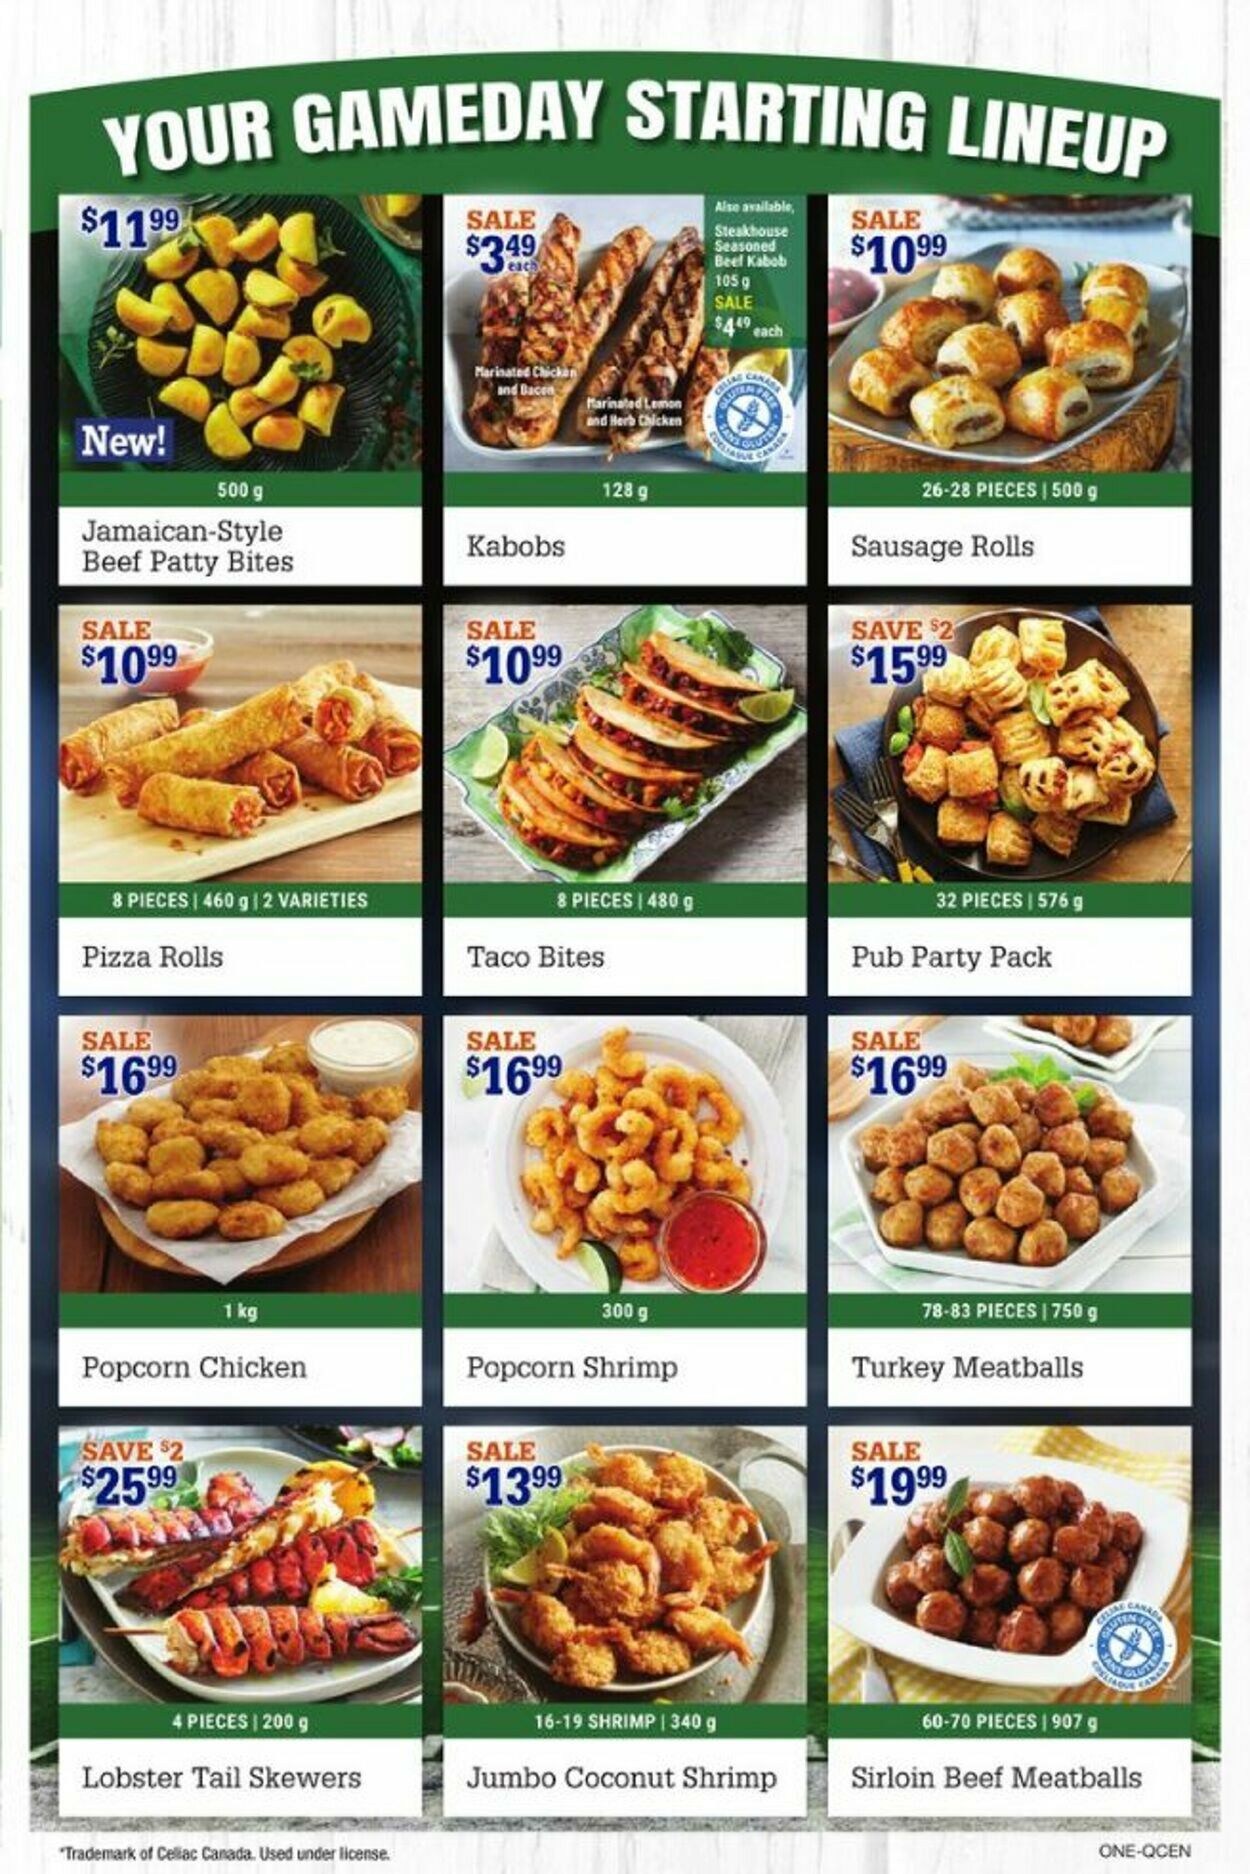 M&M Food Market Flyer from 02/08/2024